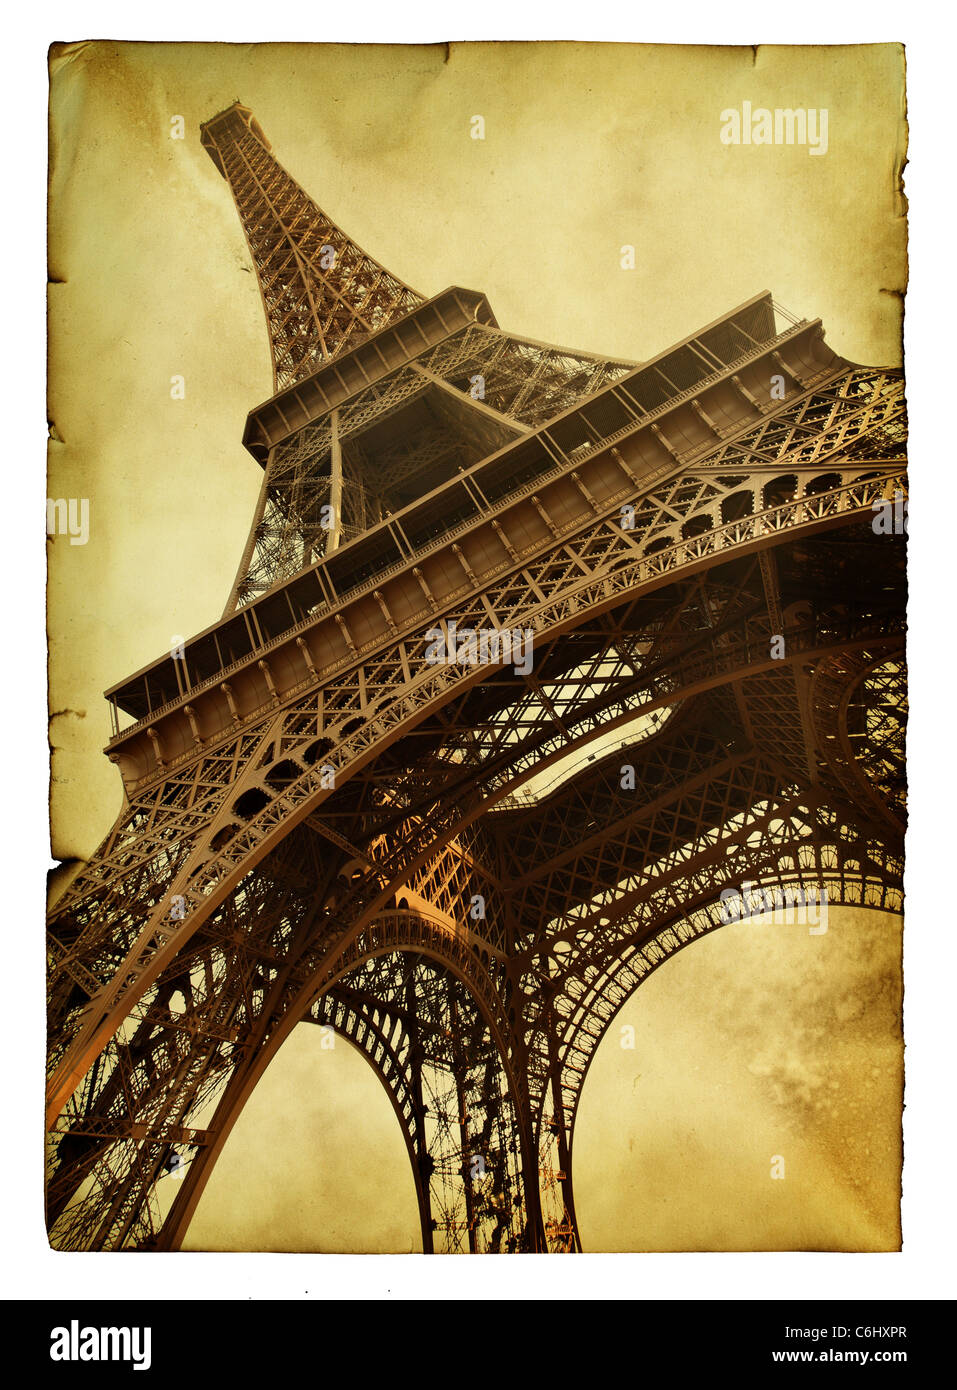 Vntage postcard with Eiffel tower isolated over white background Stock Photo